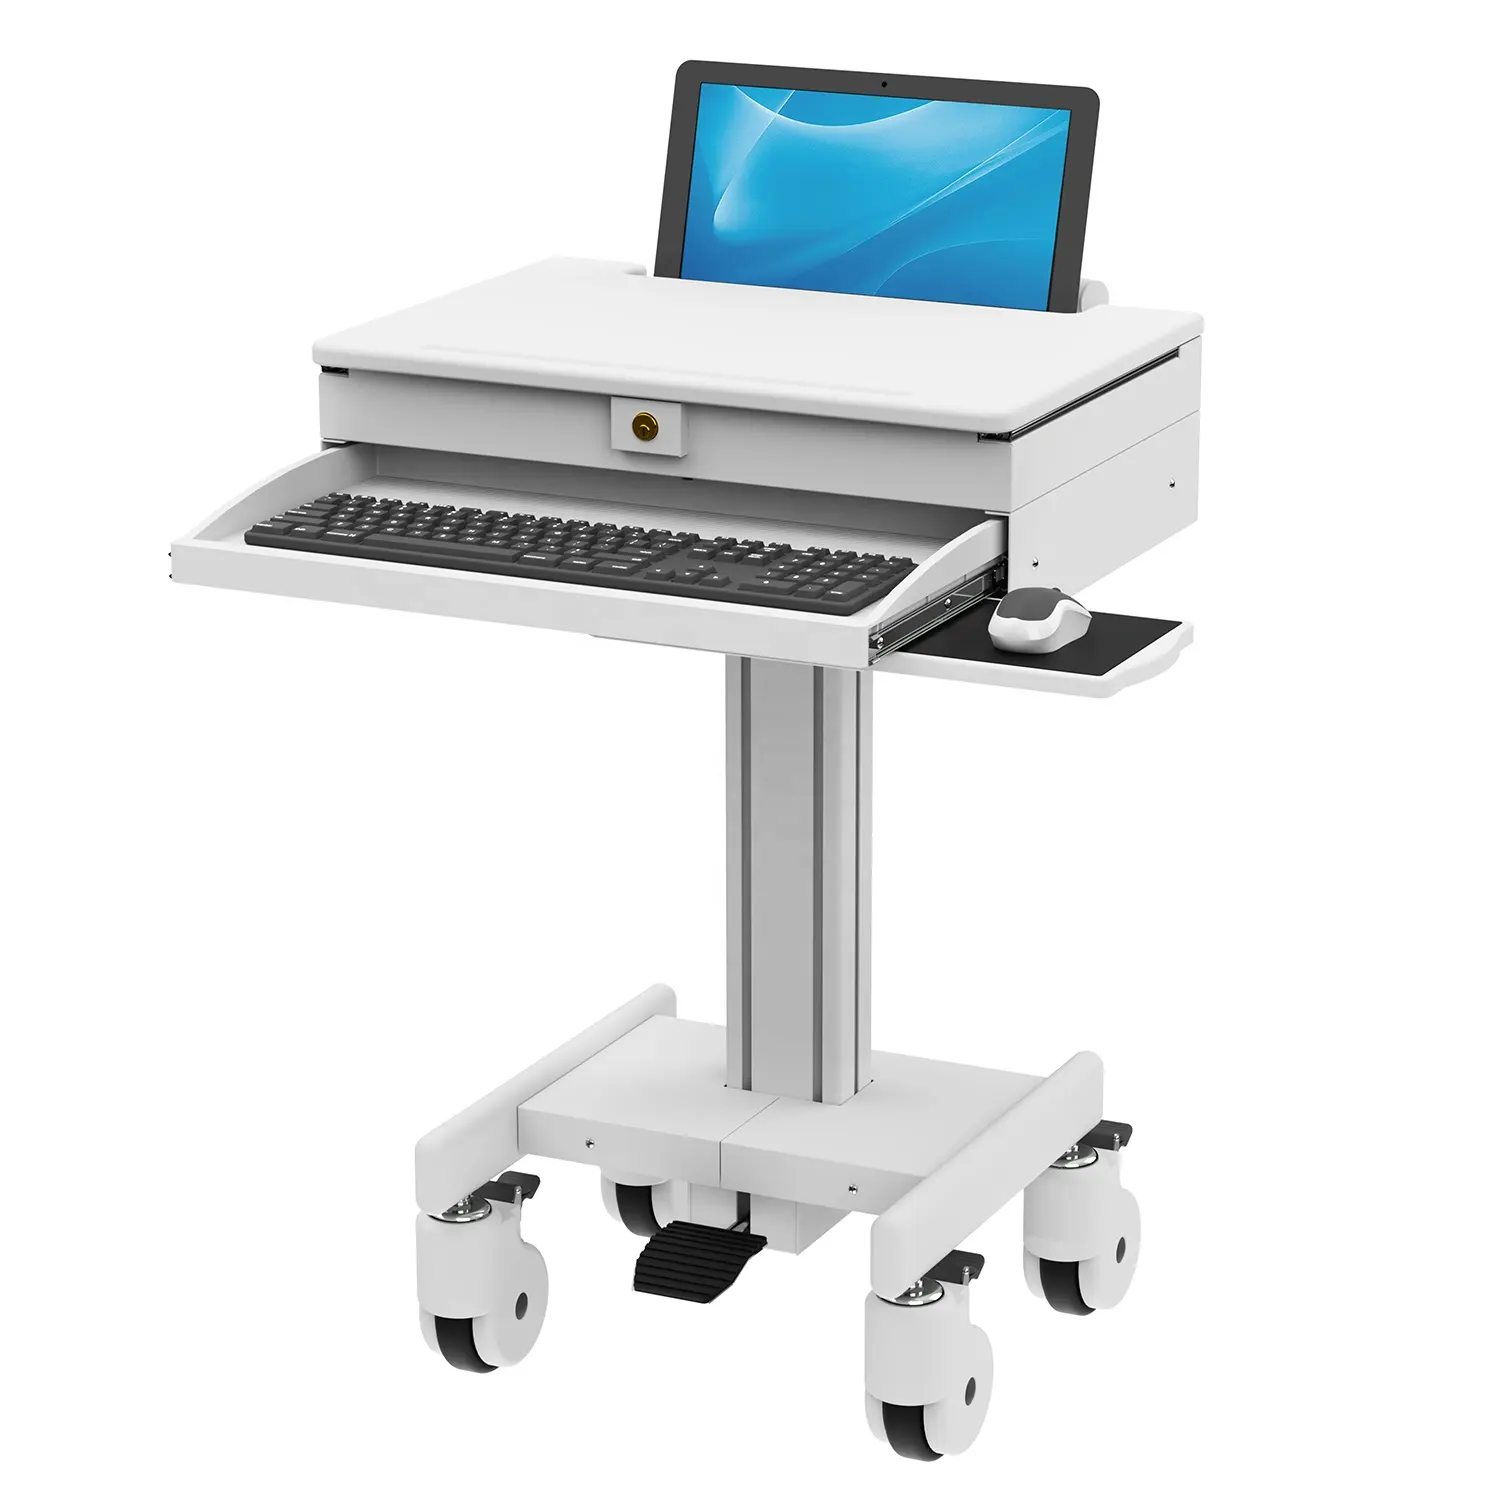 Hospital Medical Trolley for Monitor Medical Workstation Cart Medical Computing Cart with Lockable Laptop storage space